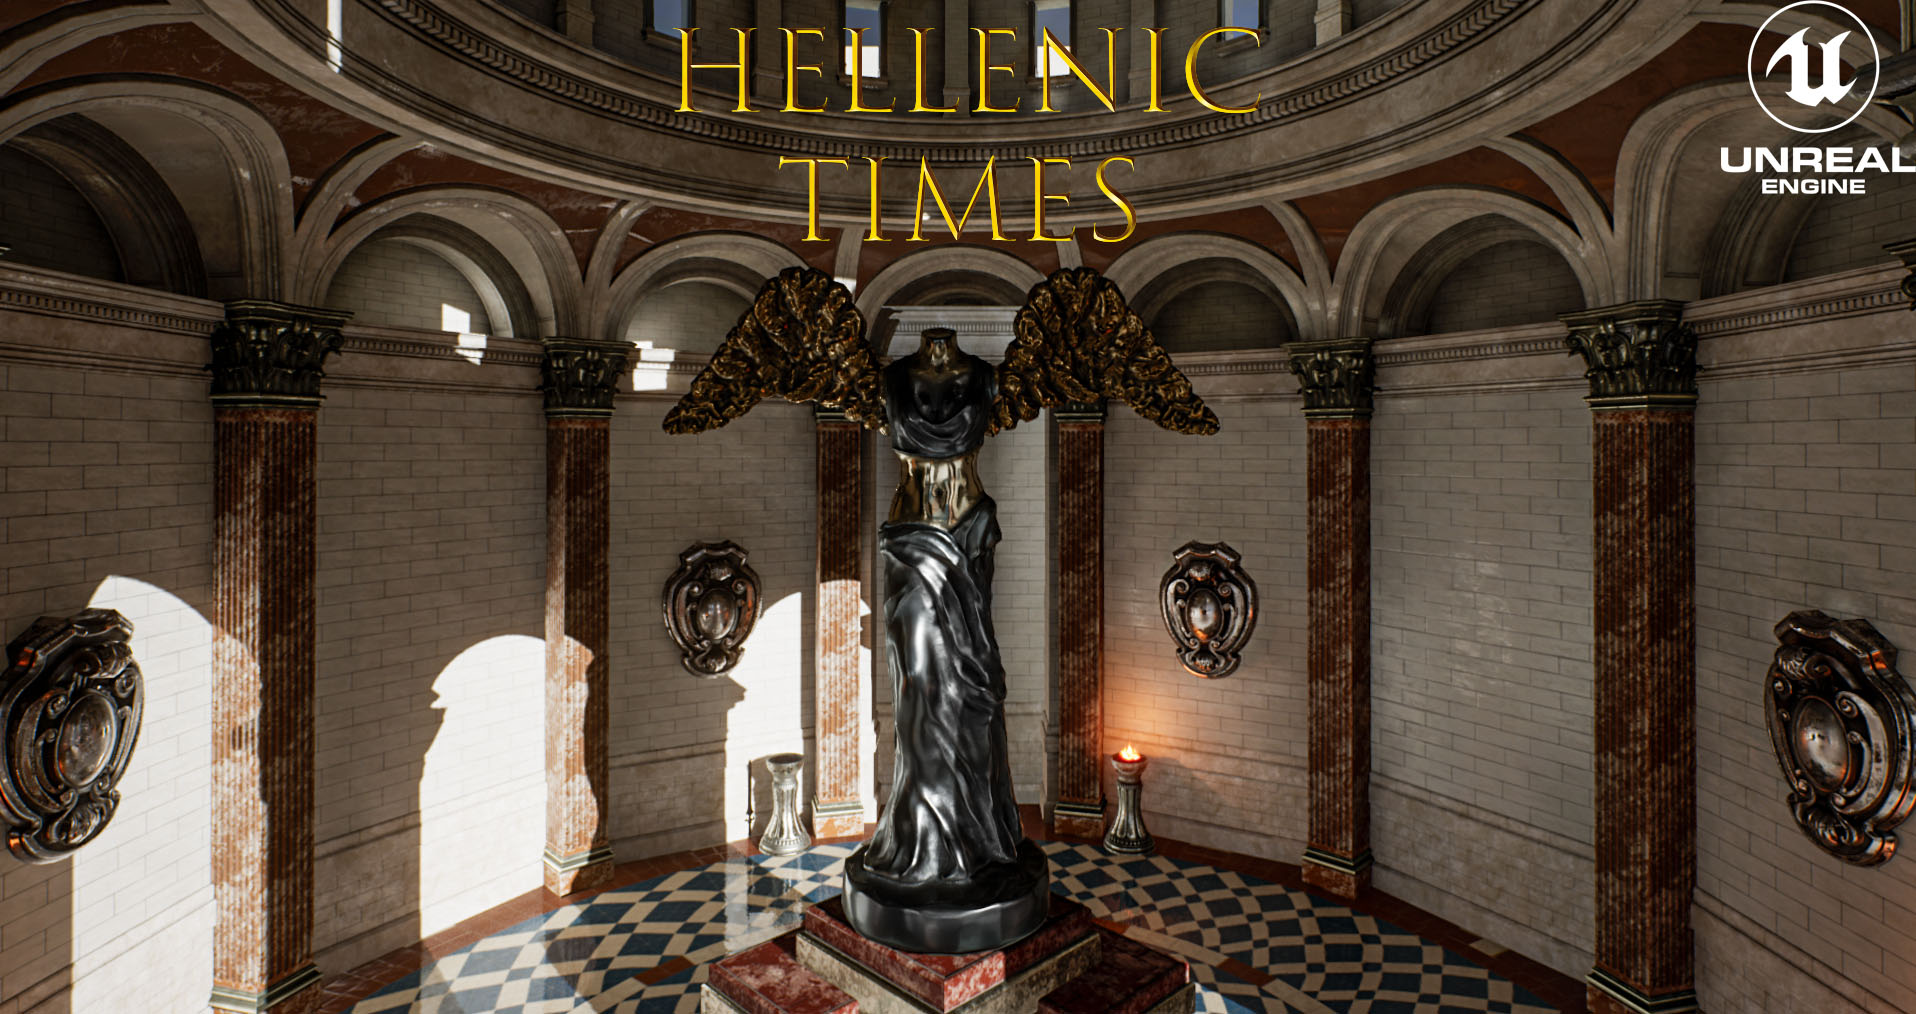 HELLENIC TIMES